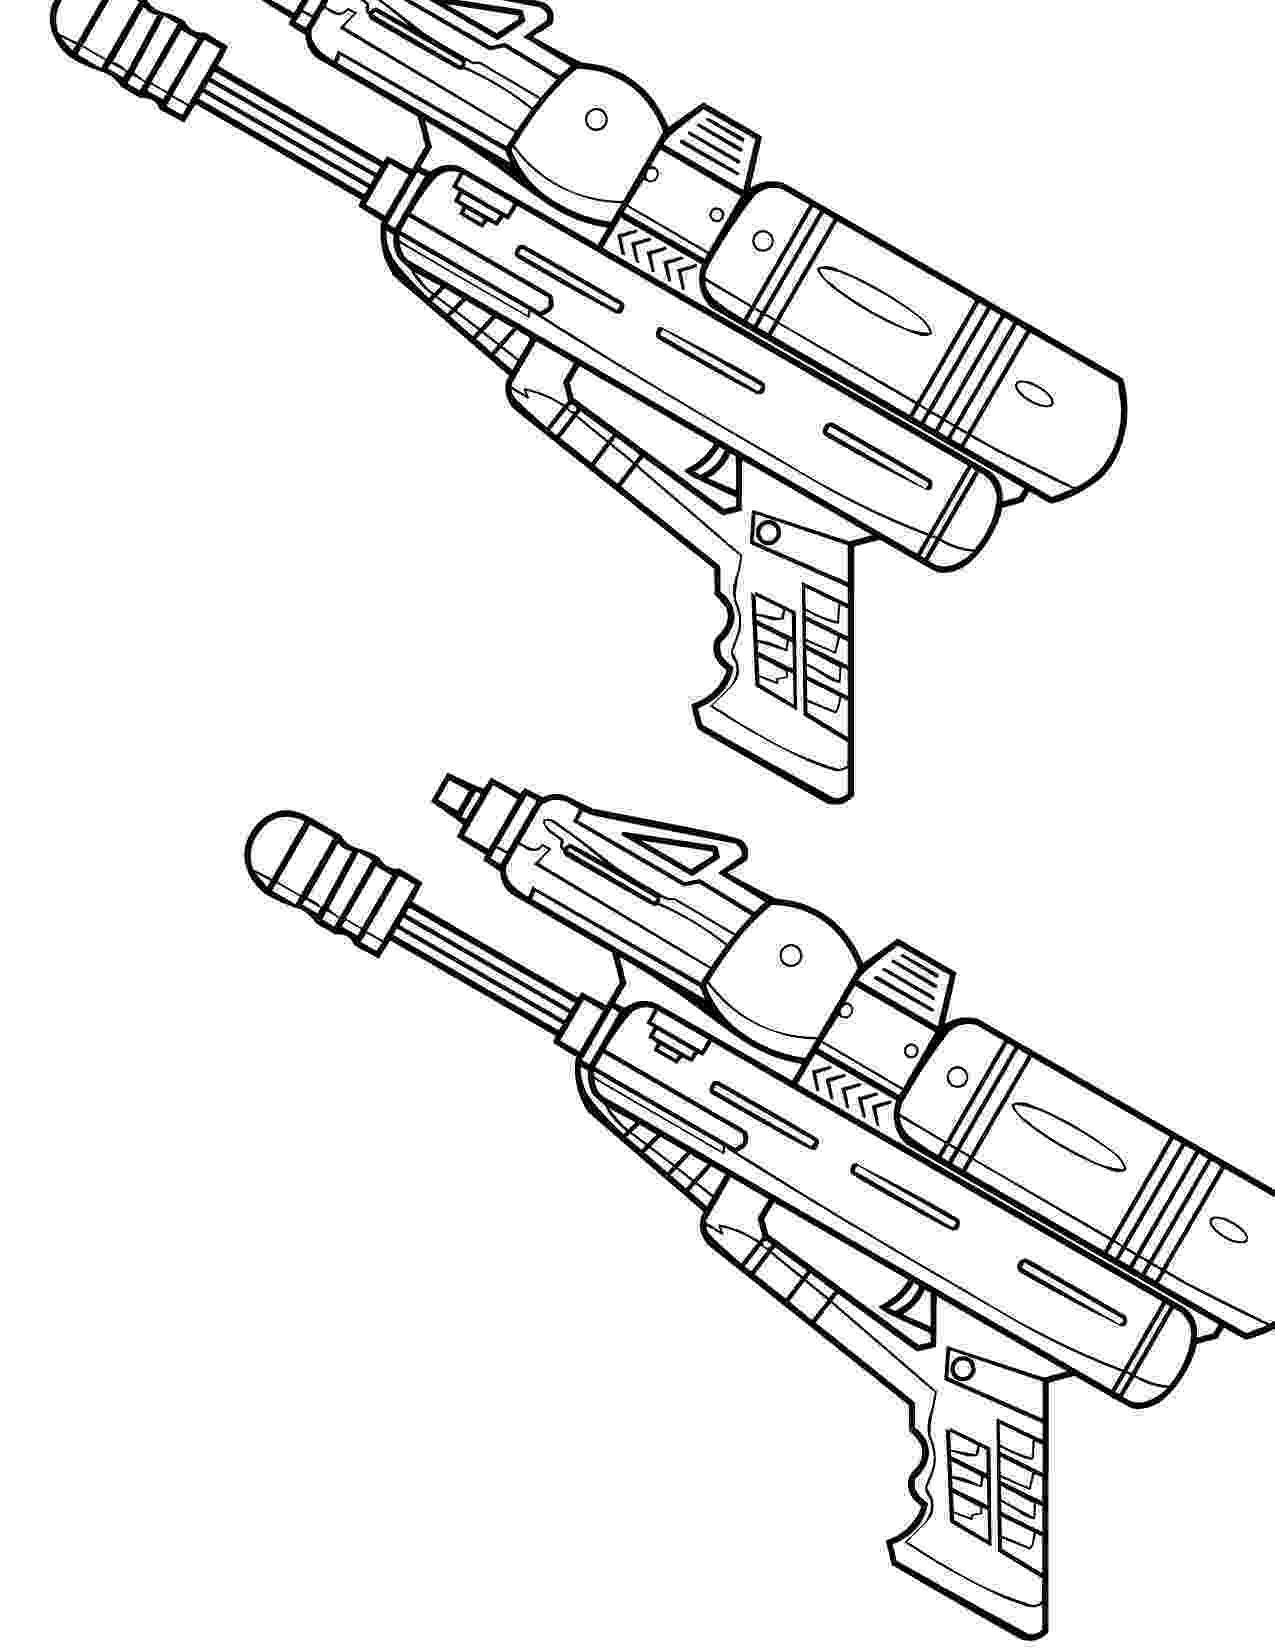 gun coloring pictures gun coloring pages download and print for free gun coloring pictures 